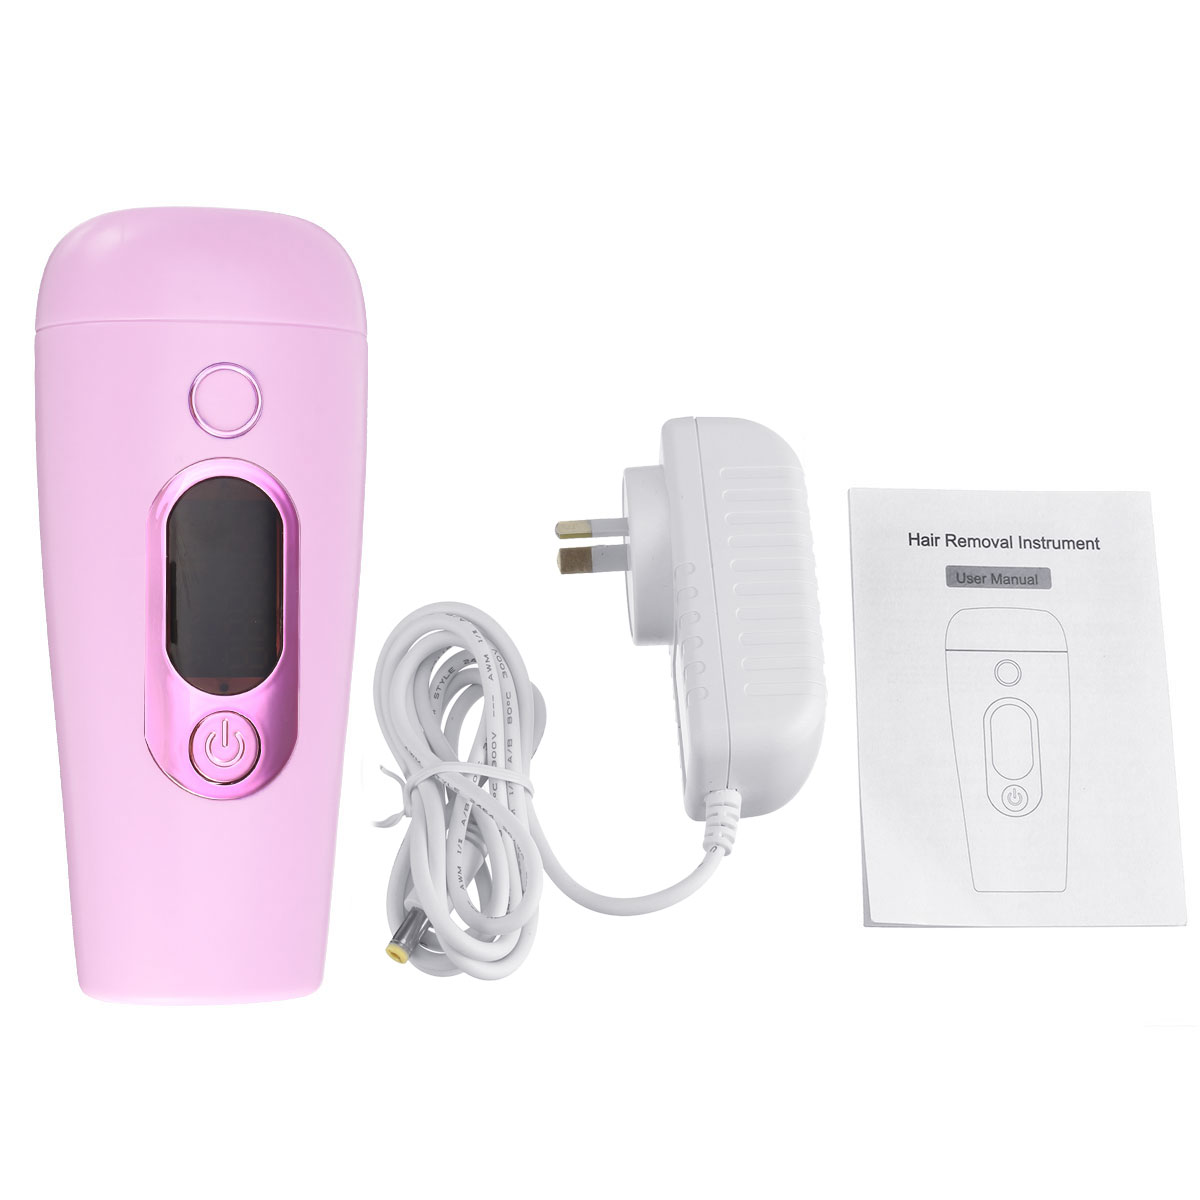 

999,999 Flashes 2 in 1 Laser IPL Permanent Hair Removal Machine 5 Setting Level Body Skin Painless Hair Remover Epilator